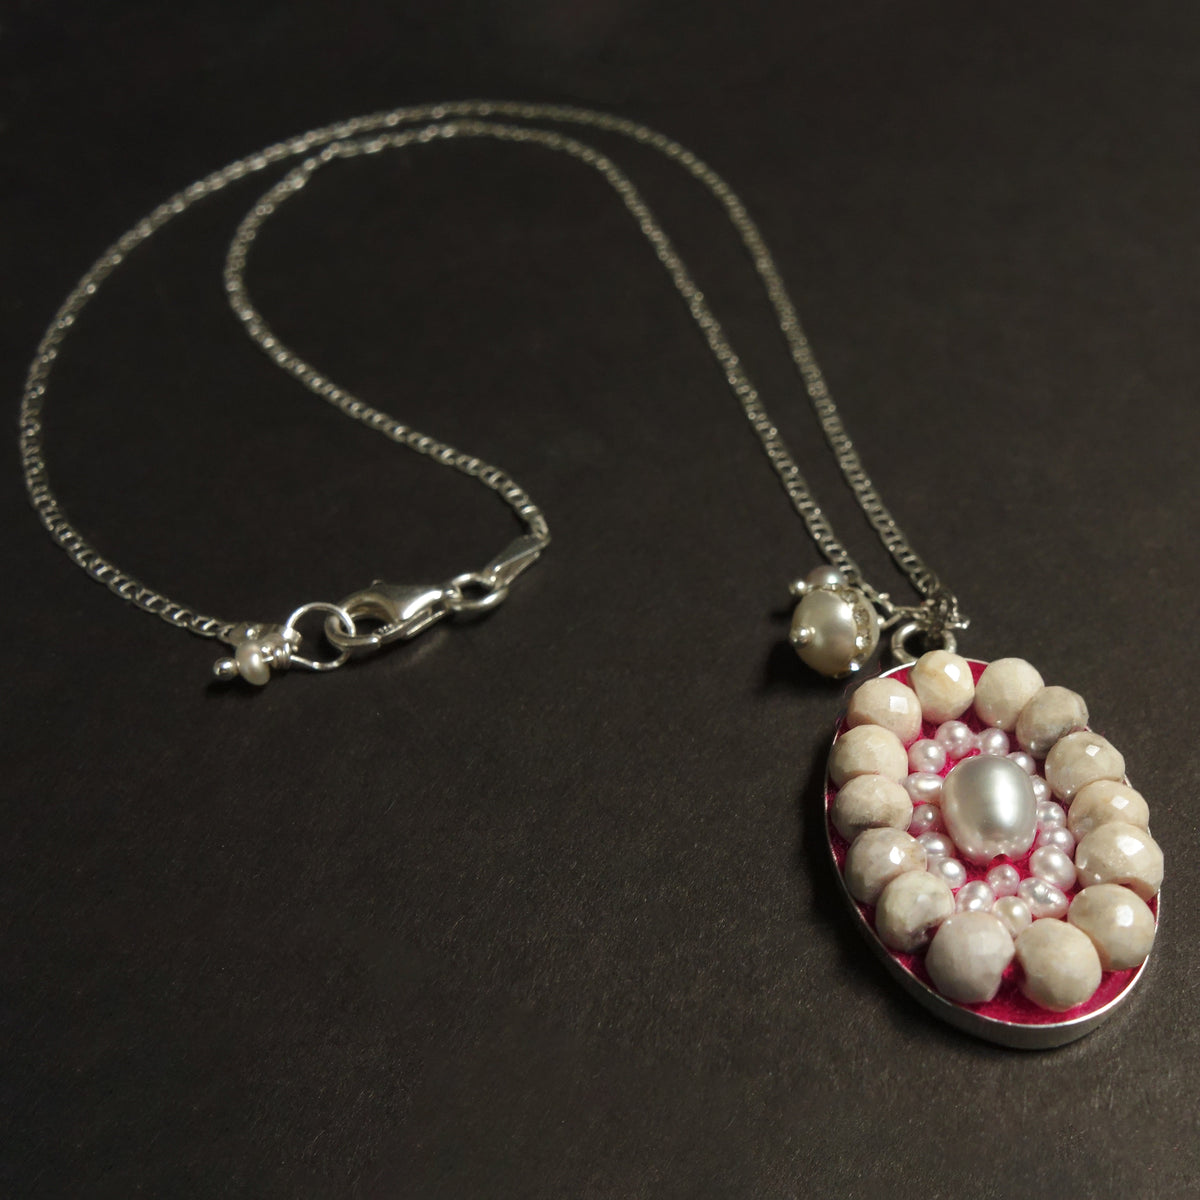 Facing Her Fears: pearl and silverite mosaic necklace